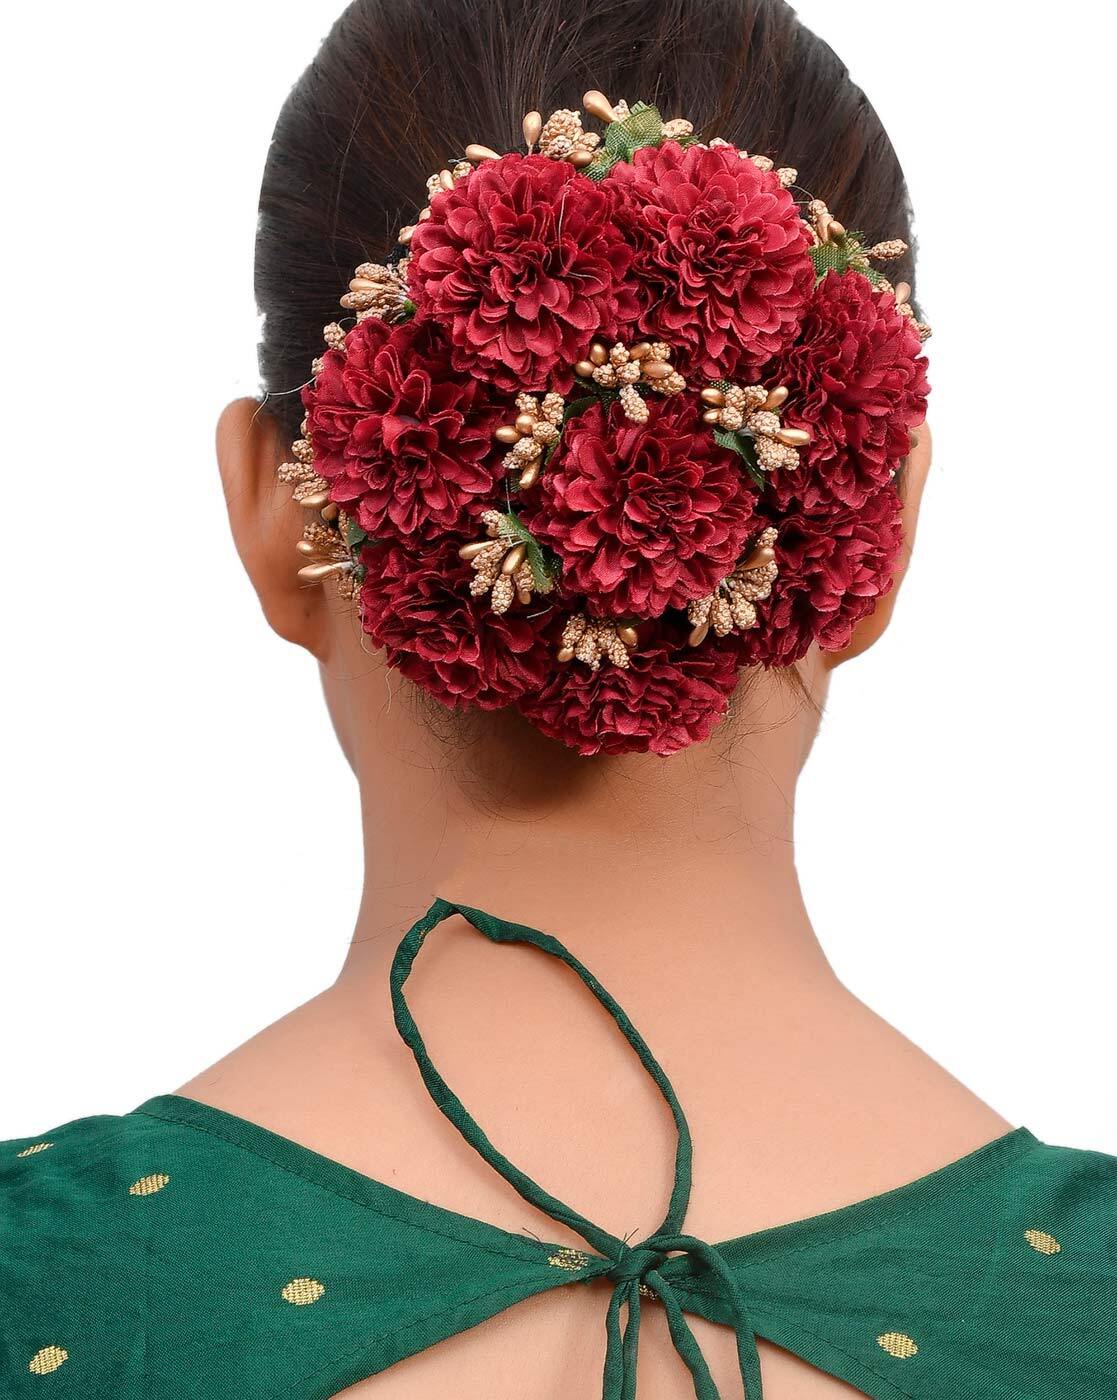 The Most Spectacular Floral Twists for Your Hair Buns! – Shopzters